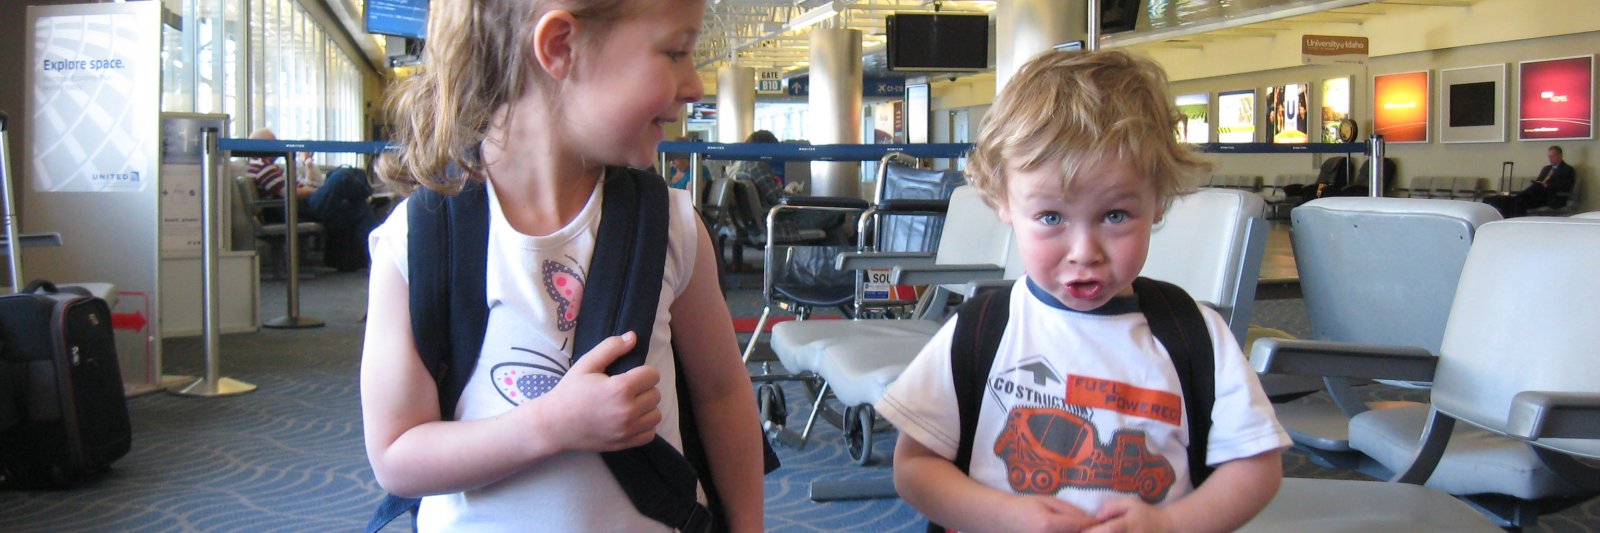 kids with backpacks in airport